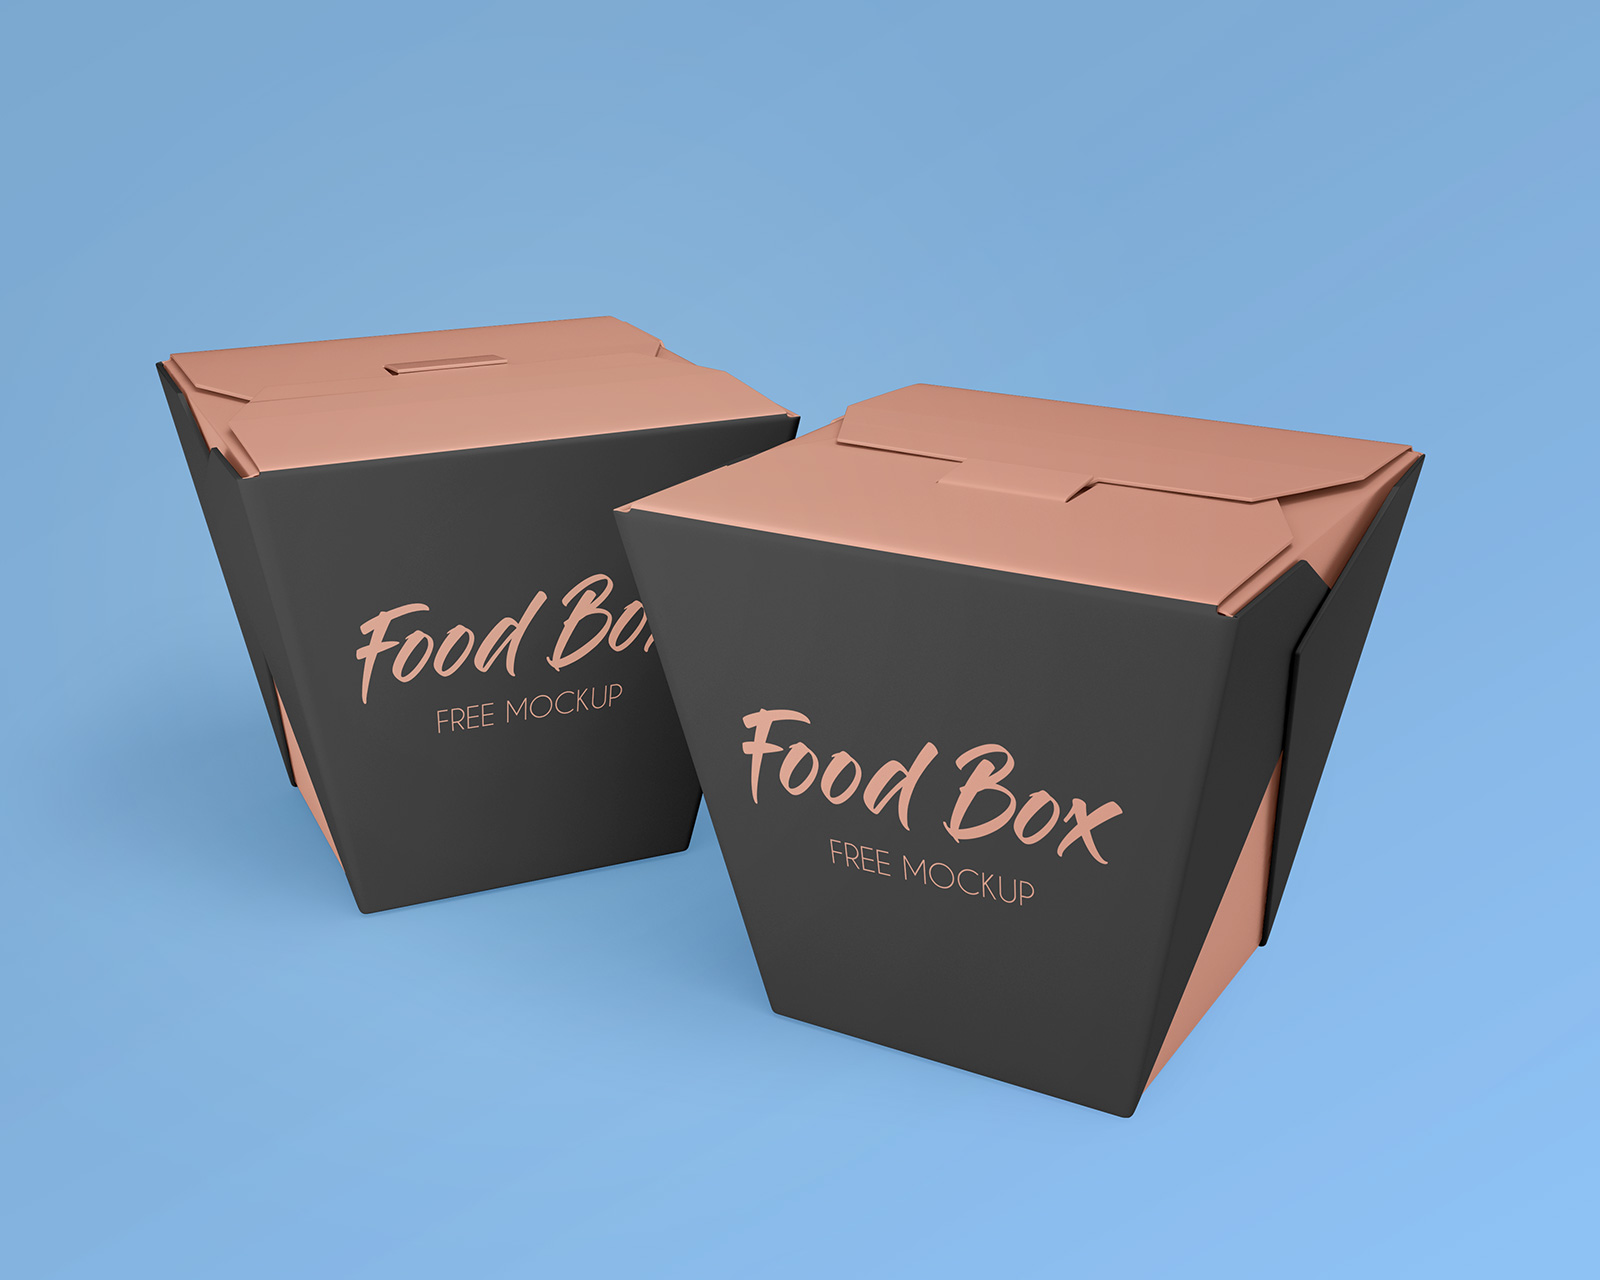 Download 15 Noodles Box Cup Packaging Psd Mockup Templates Decolore Net PSD Mockup Templates